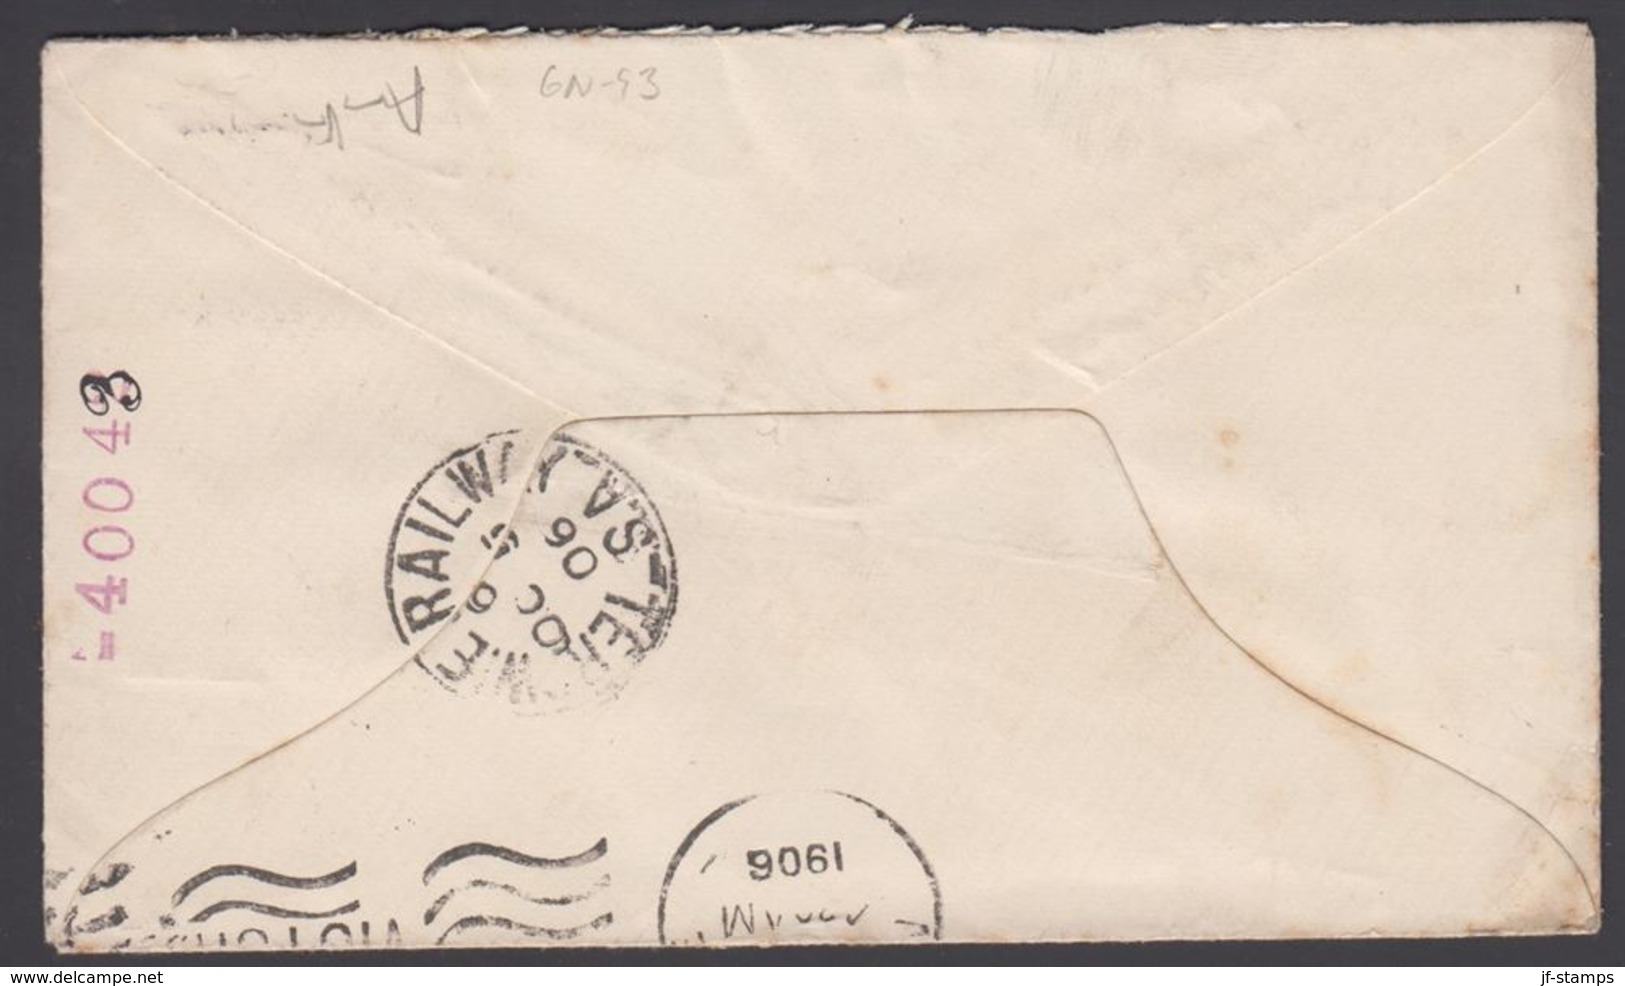 1906. SOUTH AUSTRALIA AUSTRALIA  TWO PENCE VICTORIA To Melbourne OCT - 8 1906. (MICHEL 81) - JF304912 - Lettres & Documents